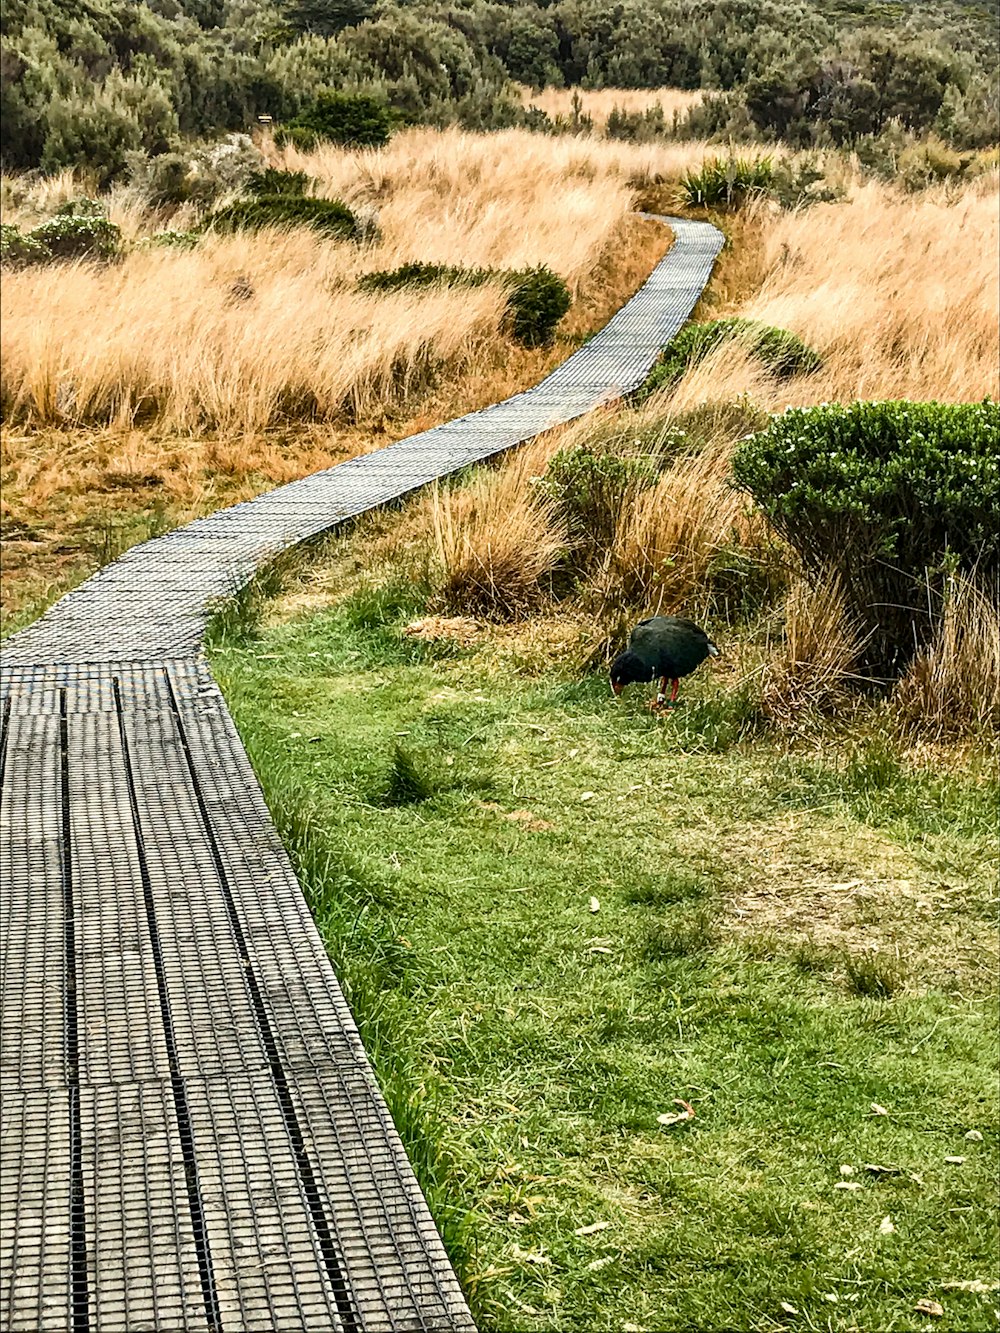 a wooden walkway in a grassy field with a hill in the background